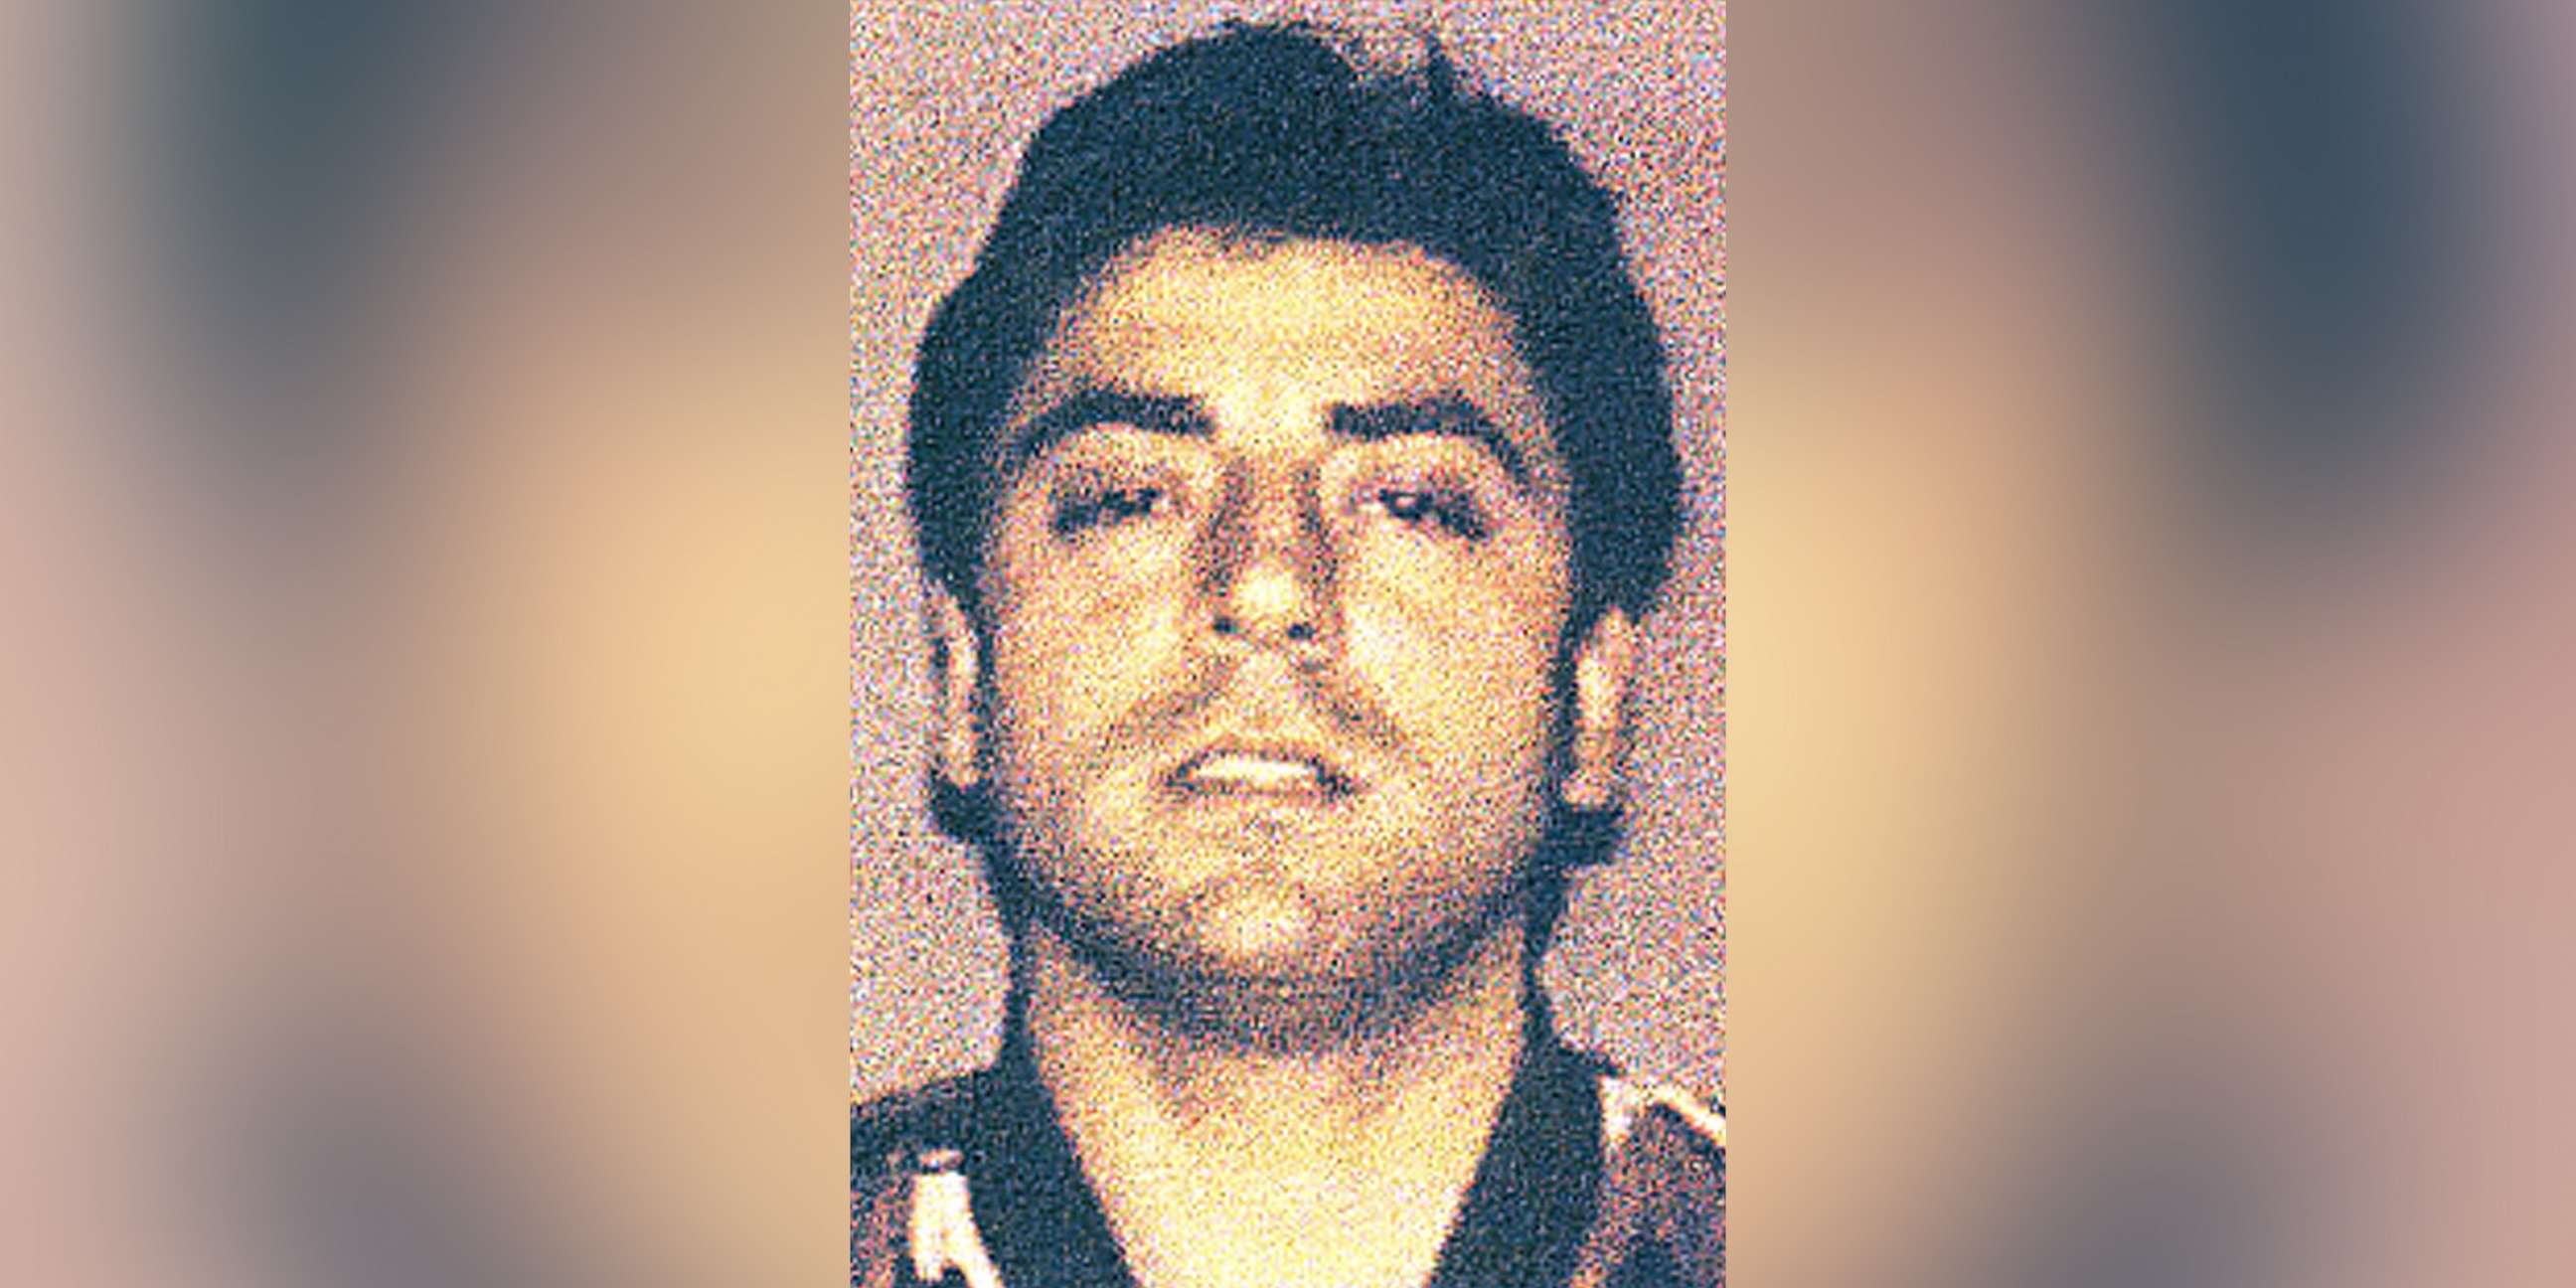 PHOTO: Francesco "Franky Boy" Cali, the reputed leader of the Gambino crime family, is pictured in a photo released by the Italian Police on Feb. 7, 2008.